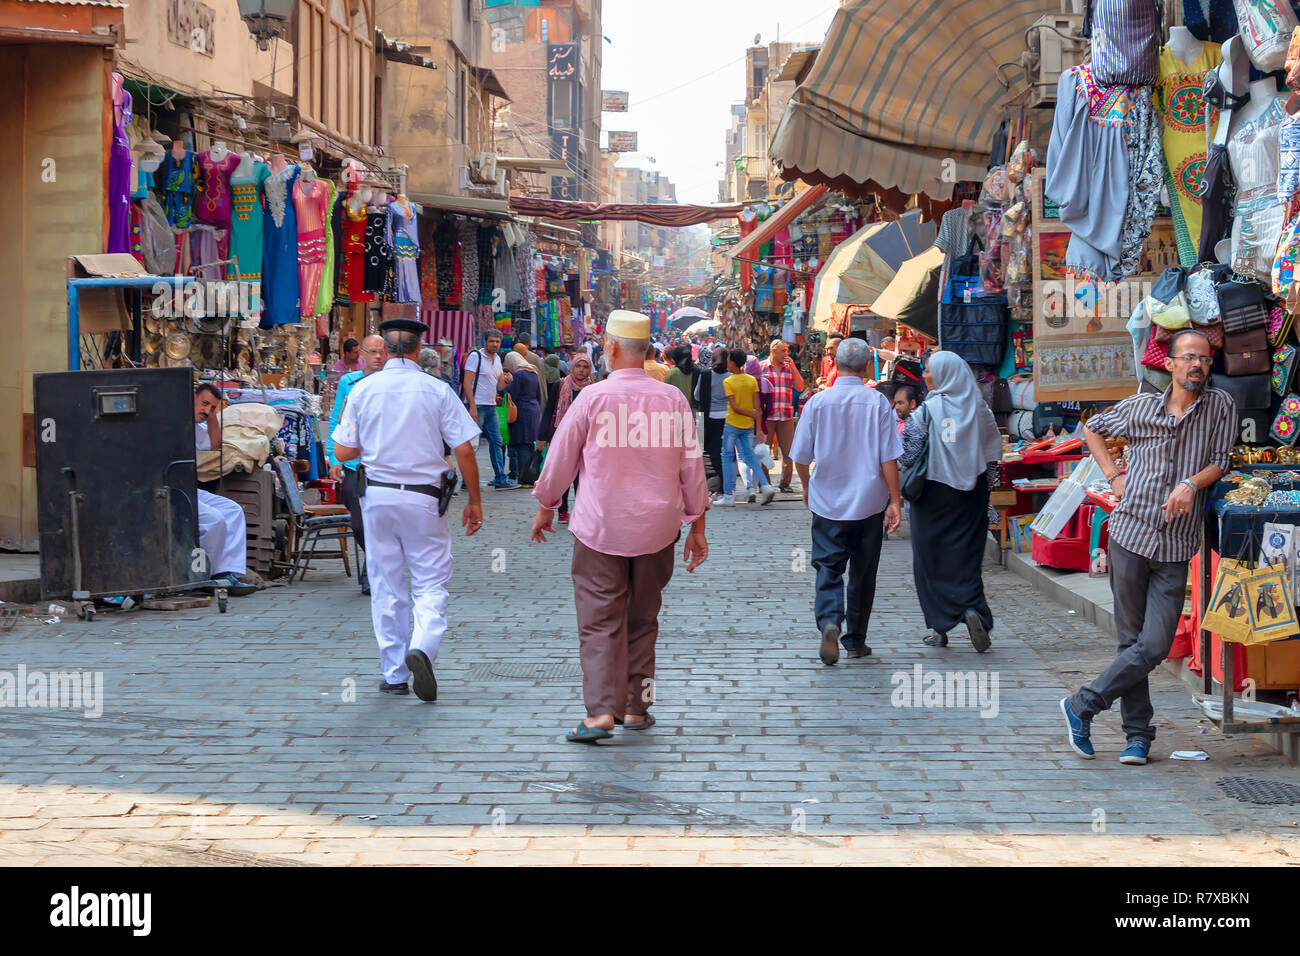 Cairo, Egypt - September 16, 2018: Walking by Khan el-Khalili, the major souk in the historic center of Islamic Cairo. The bazaar is one of Cairo's ma Stock Photo